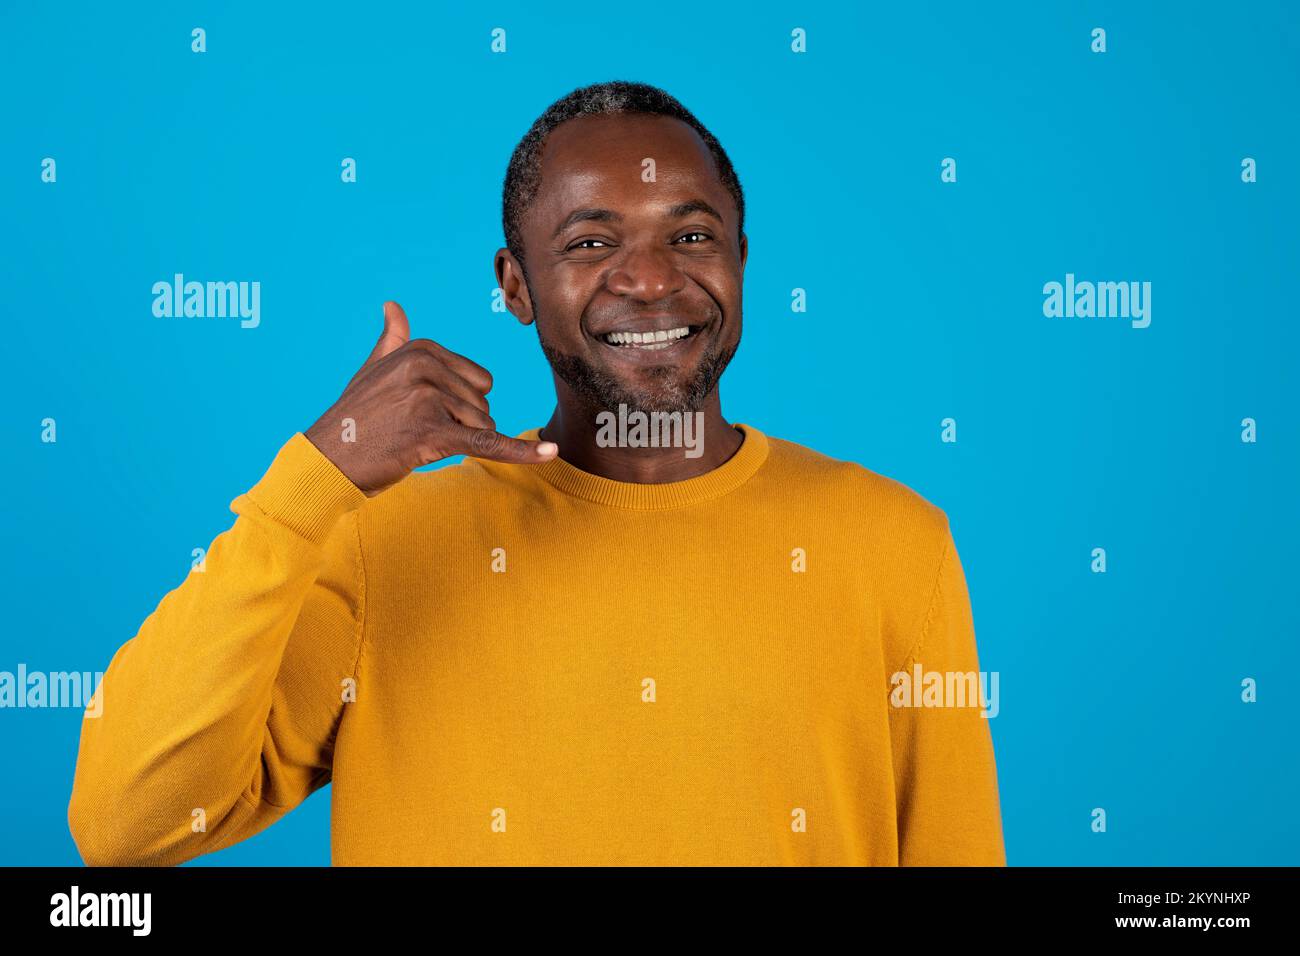 Handsome african american man showing a call me sign Stock Photo